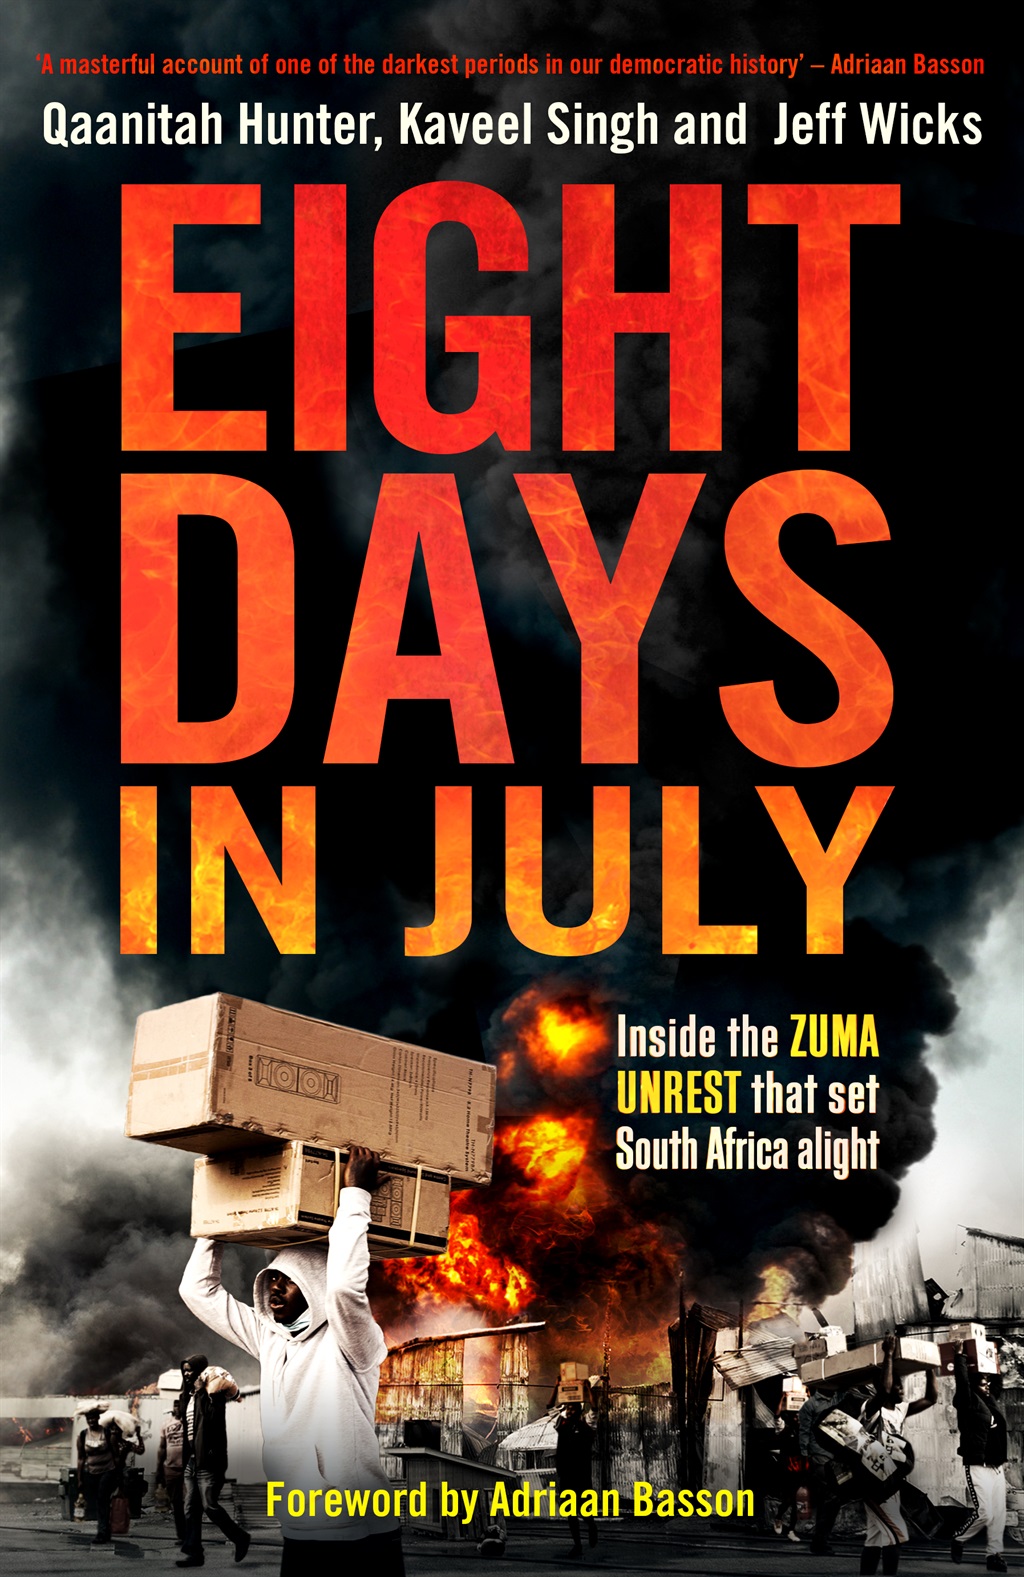  'Eight days in July